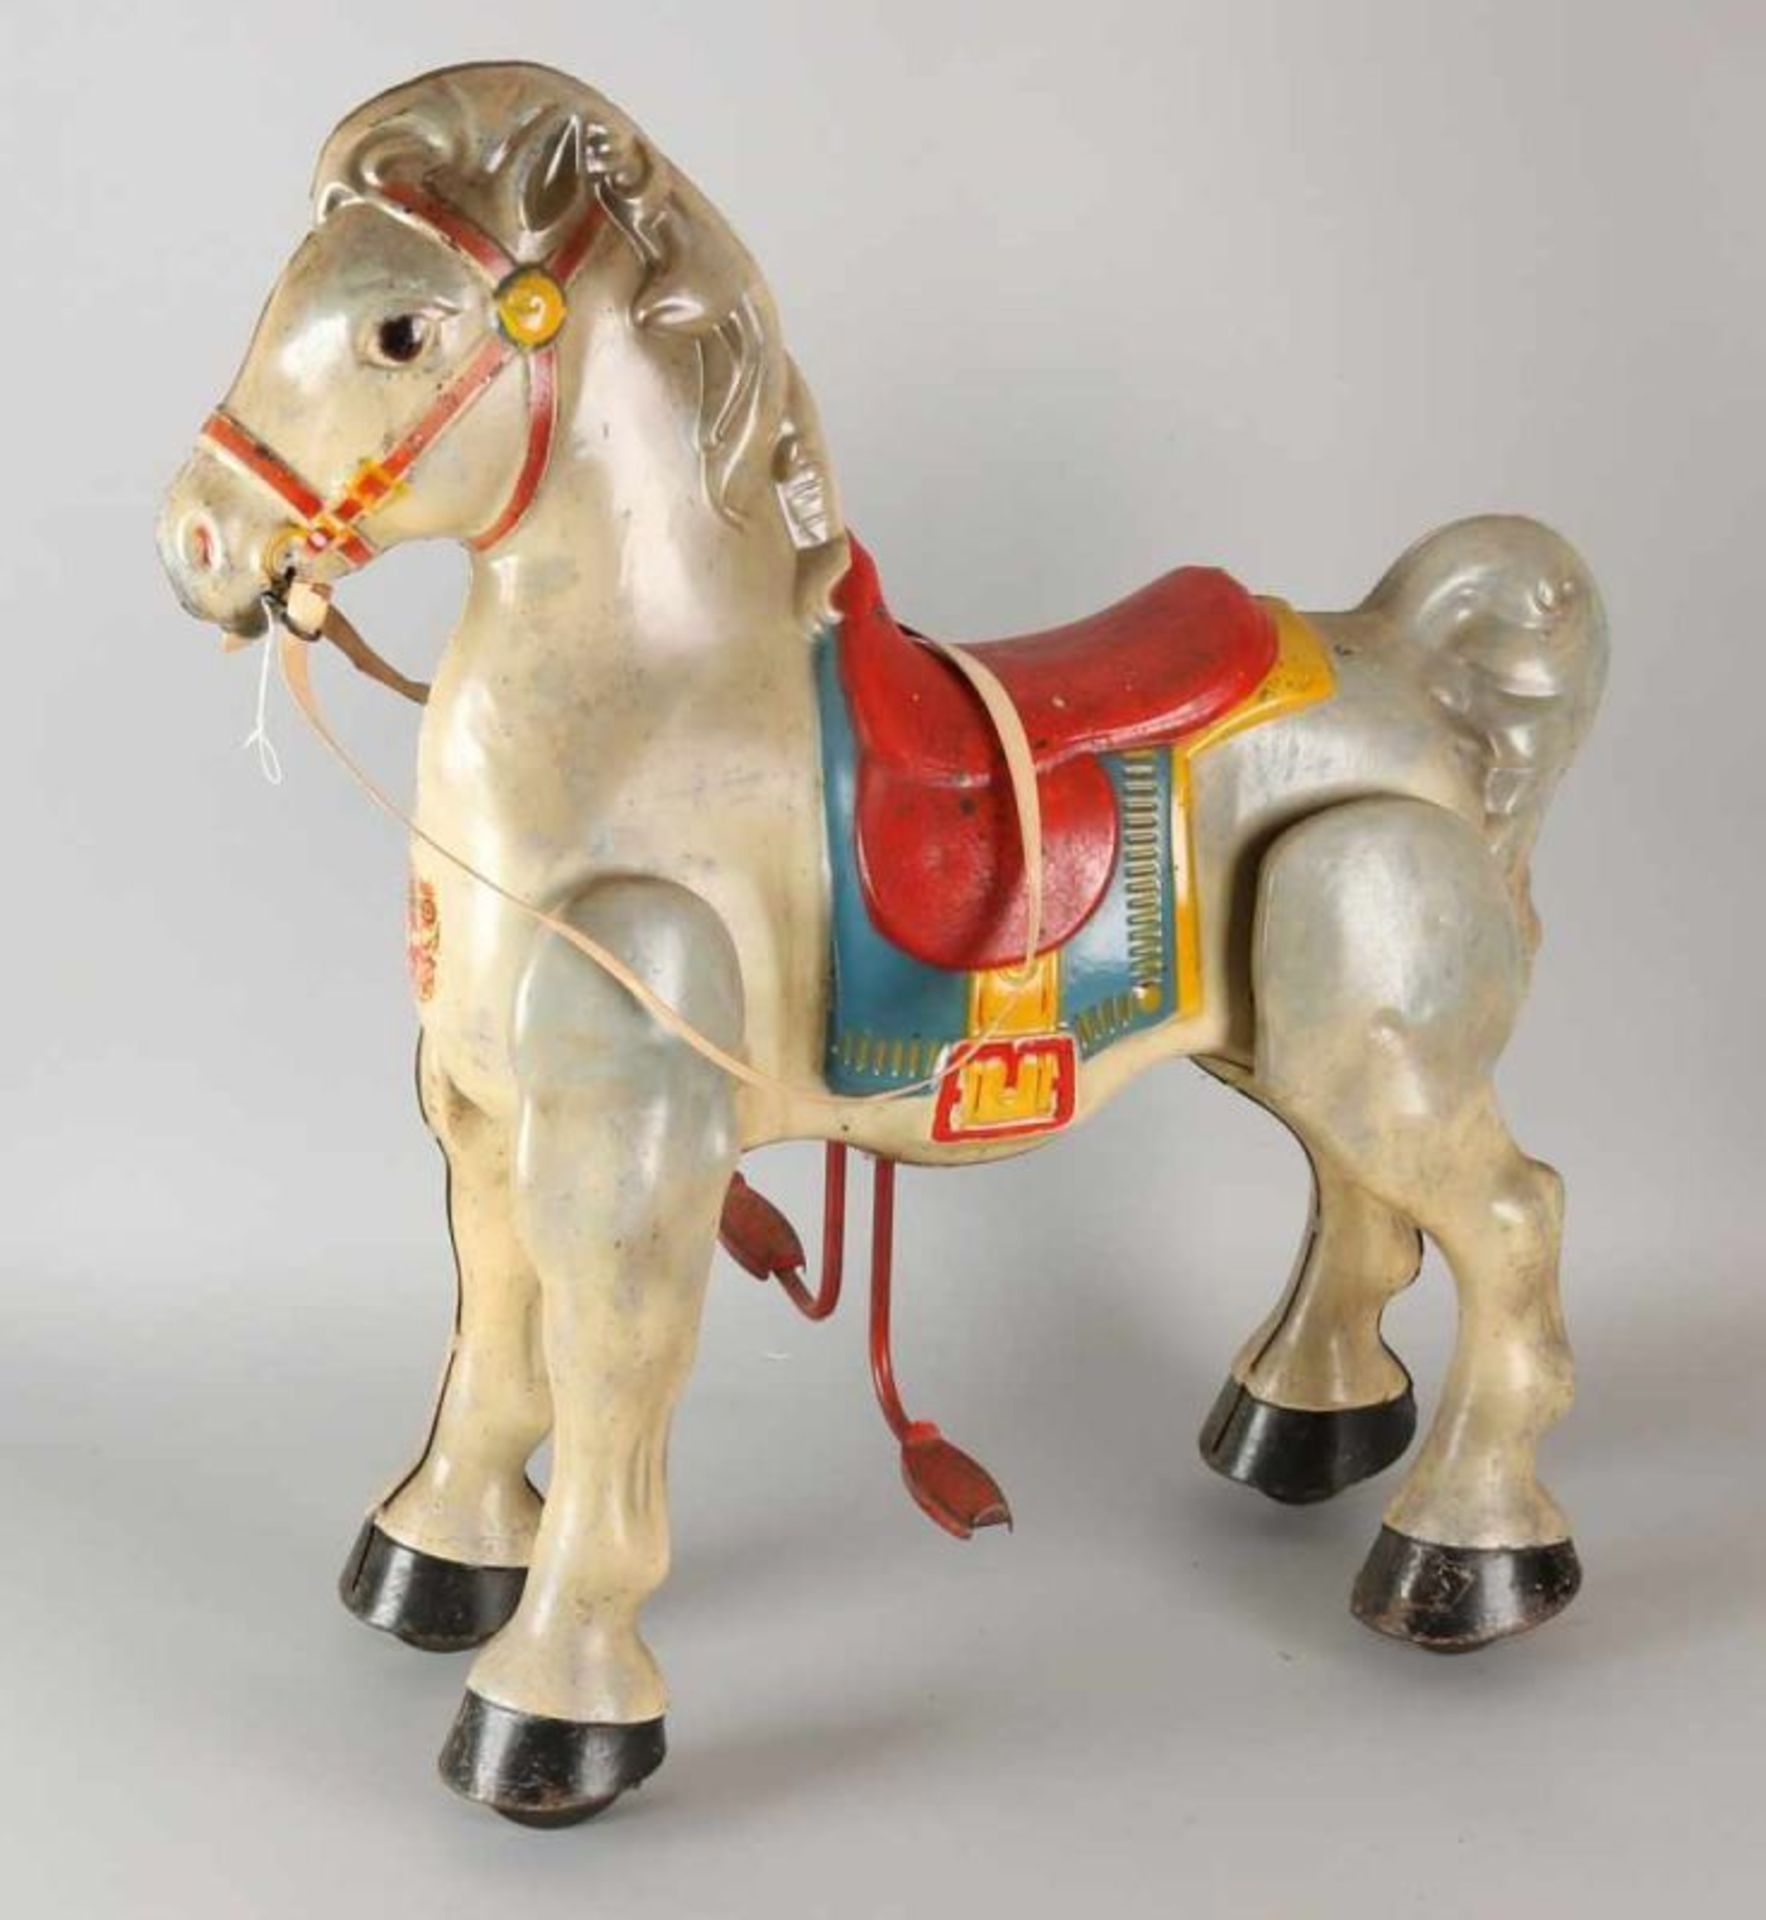 Large tin toys horse. Lithographed. Circa 1930 - 1950. Size: 60 cm. In good condition.